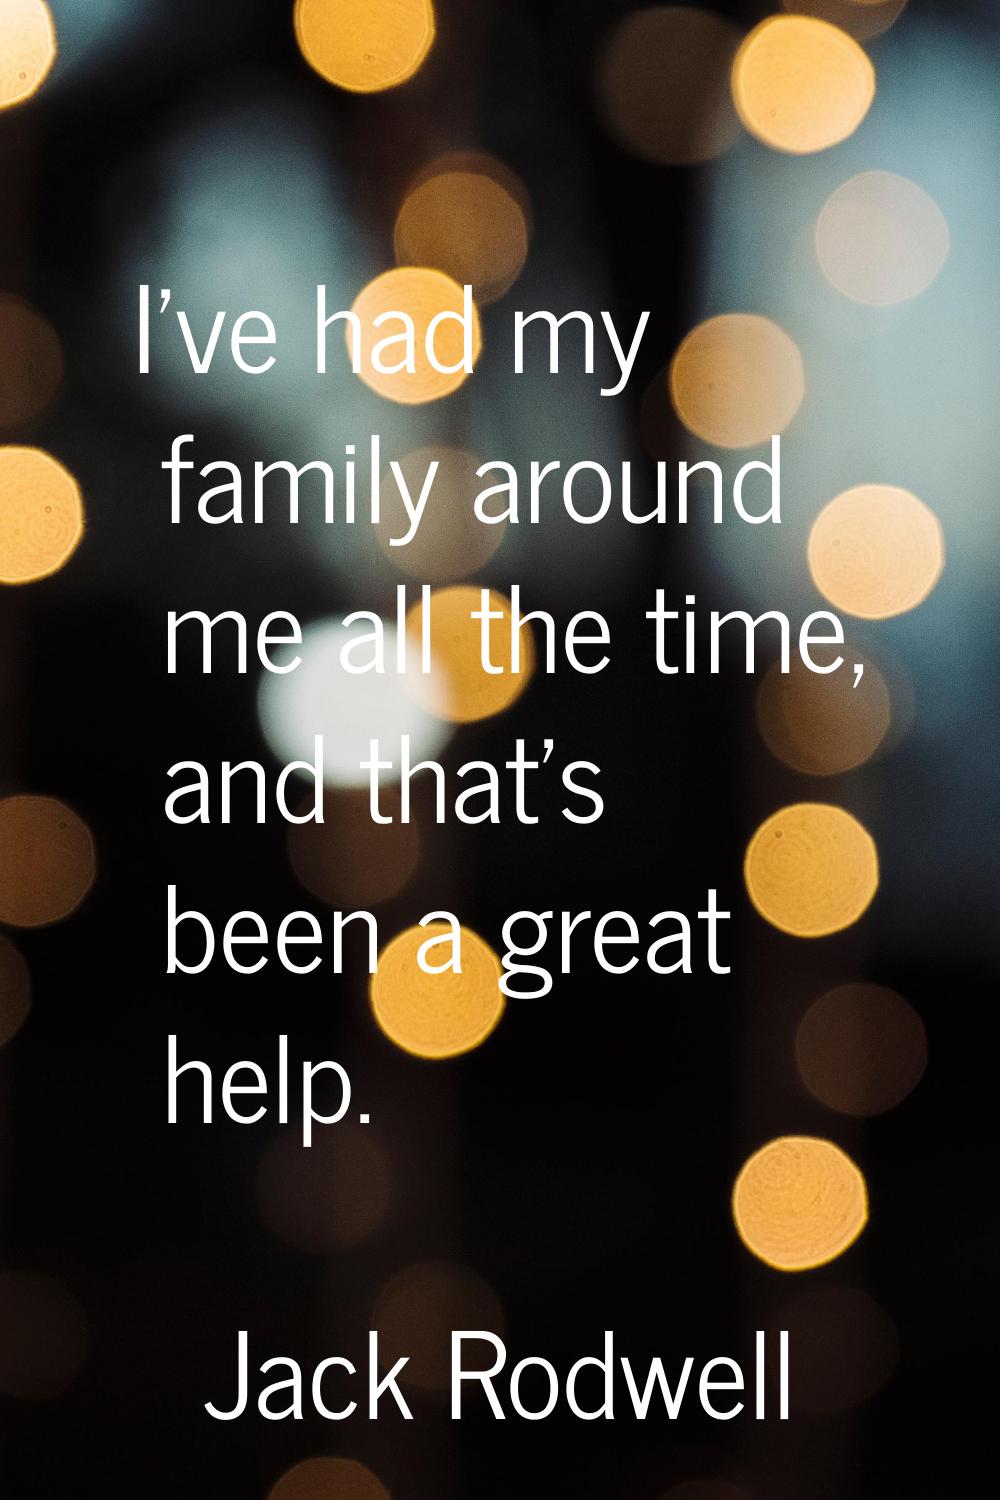 I've had my family around me all the time, and that's been a great help.